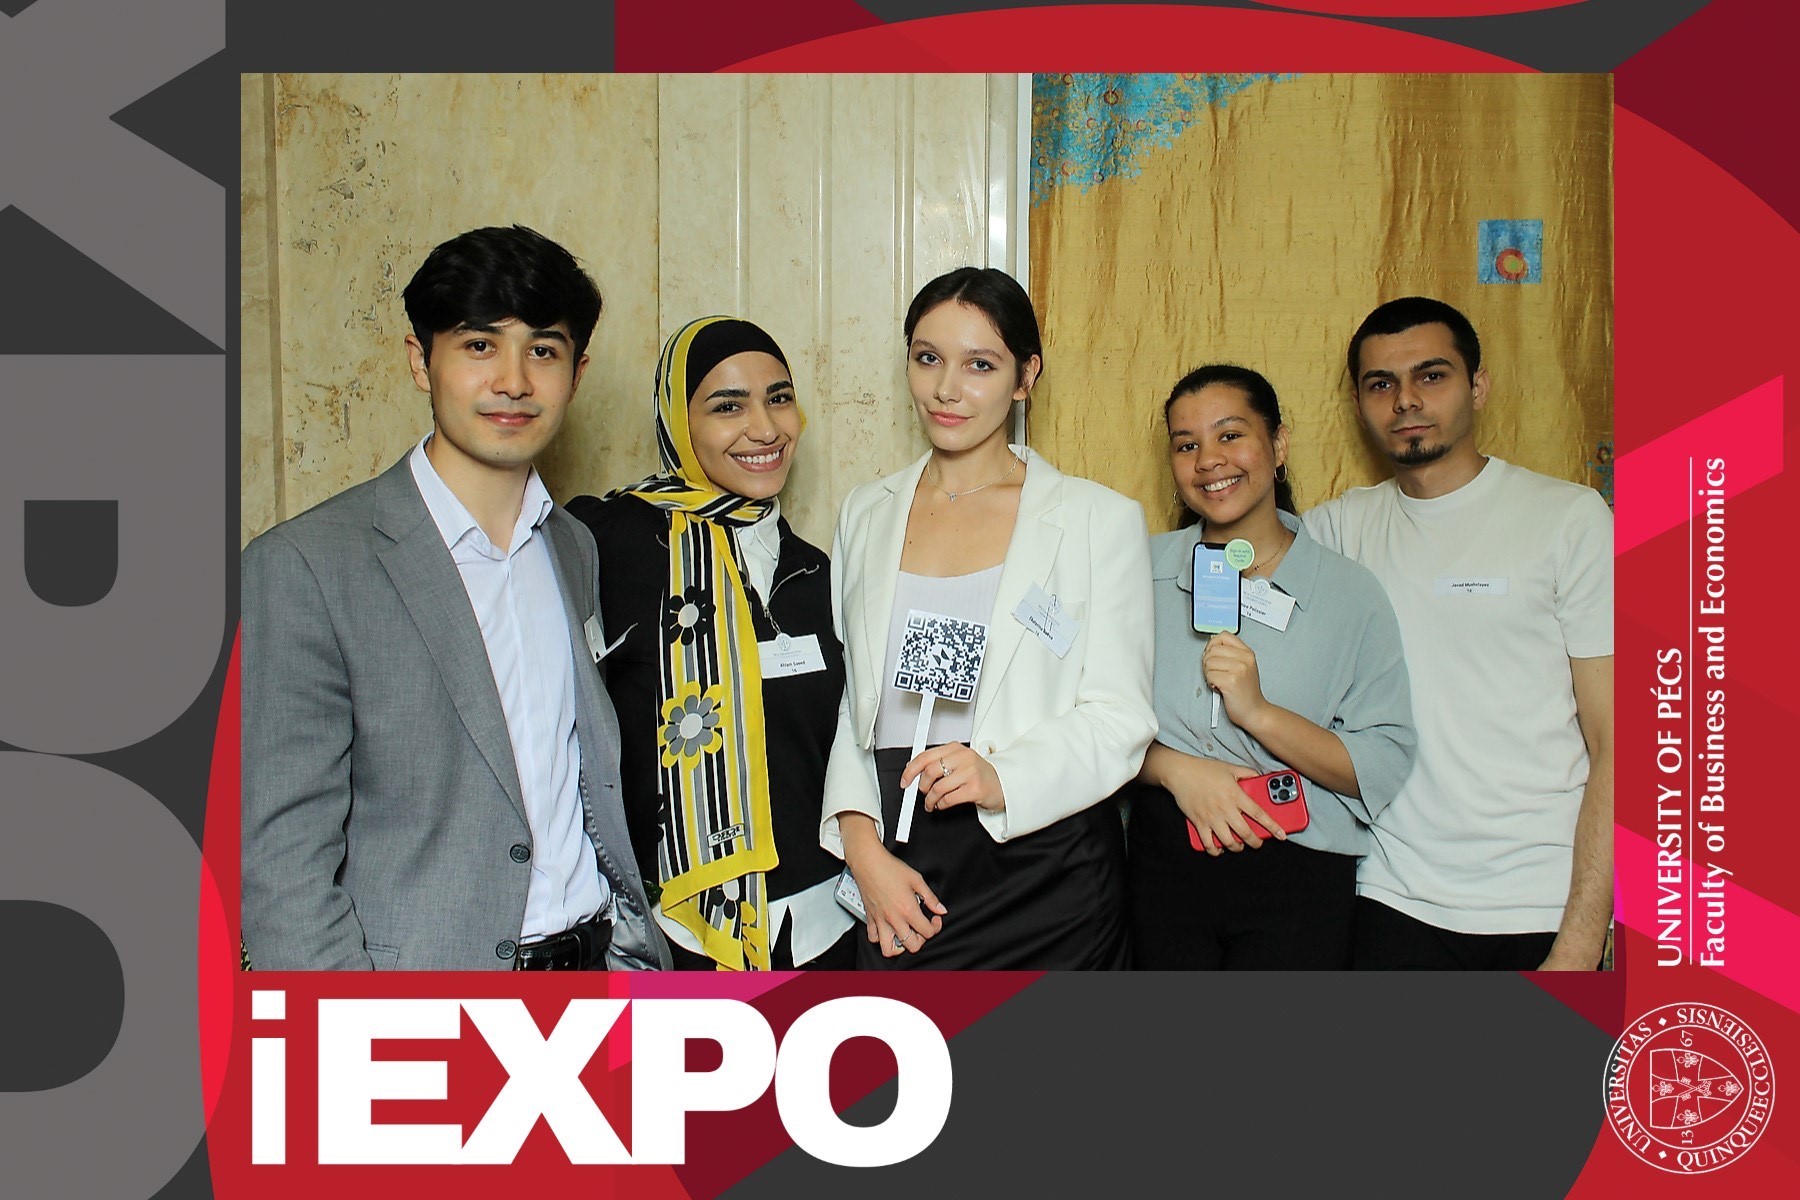 We sincerely congratulate the team of MA Social Policy students Ahlam Nassar Omar Saeed, Janice Pelissier, Ekaterina Boeva, Nurvokhid Bakhromov, and Yavad Mustafayev for their excellent results and success in the IExpo student competition organized by the Faculty of Business and Economics.